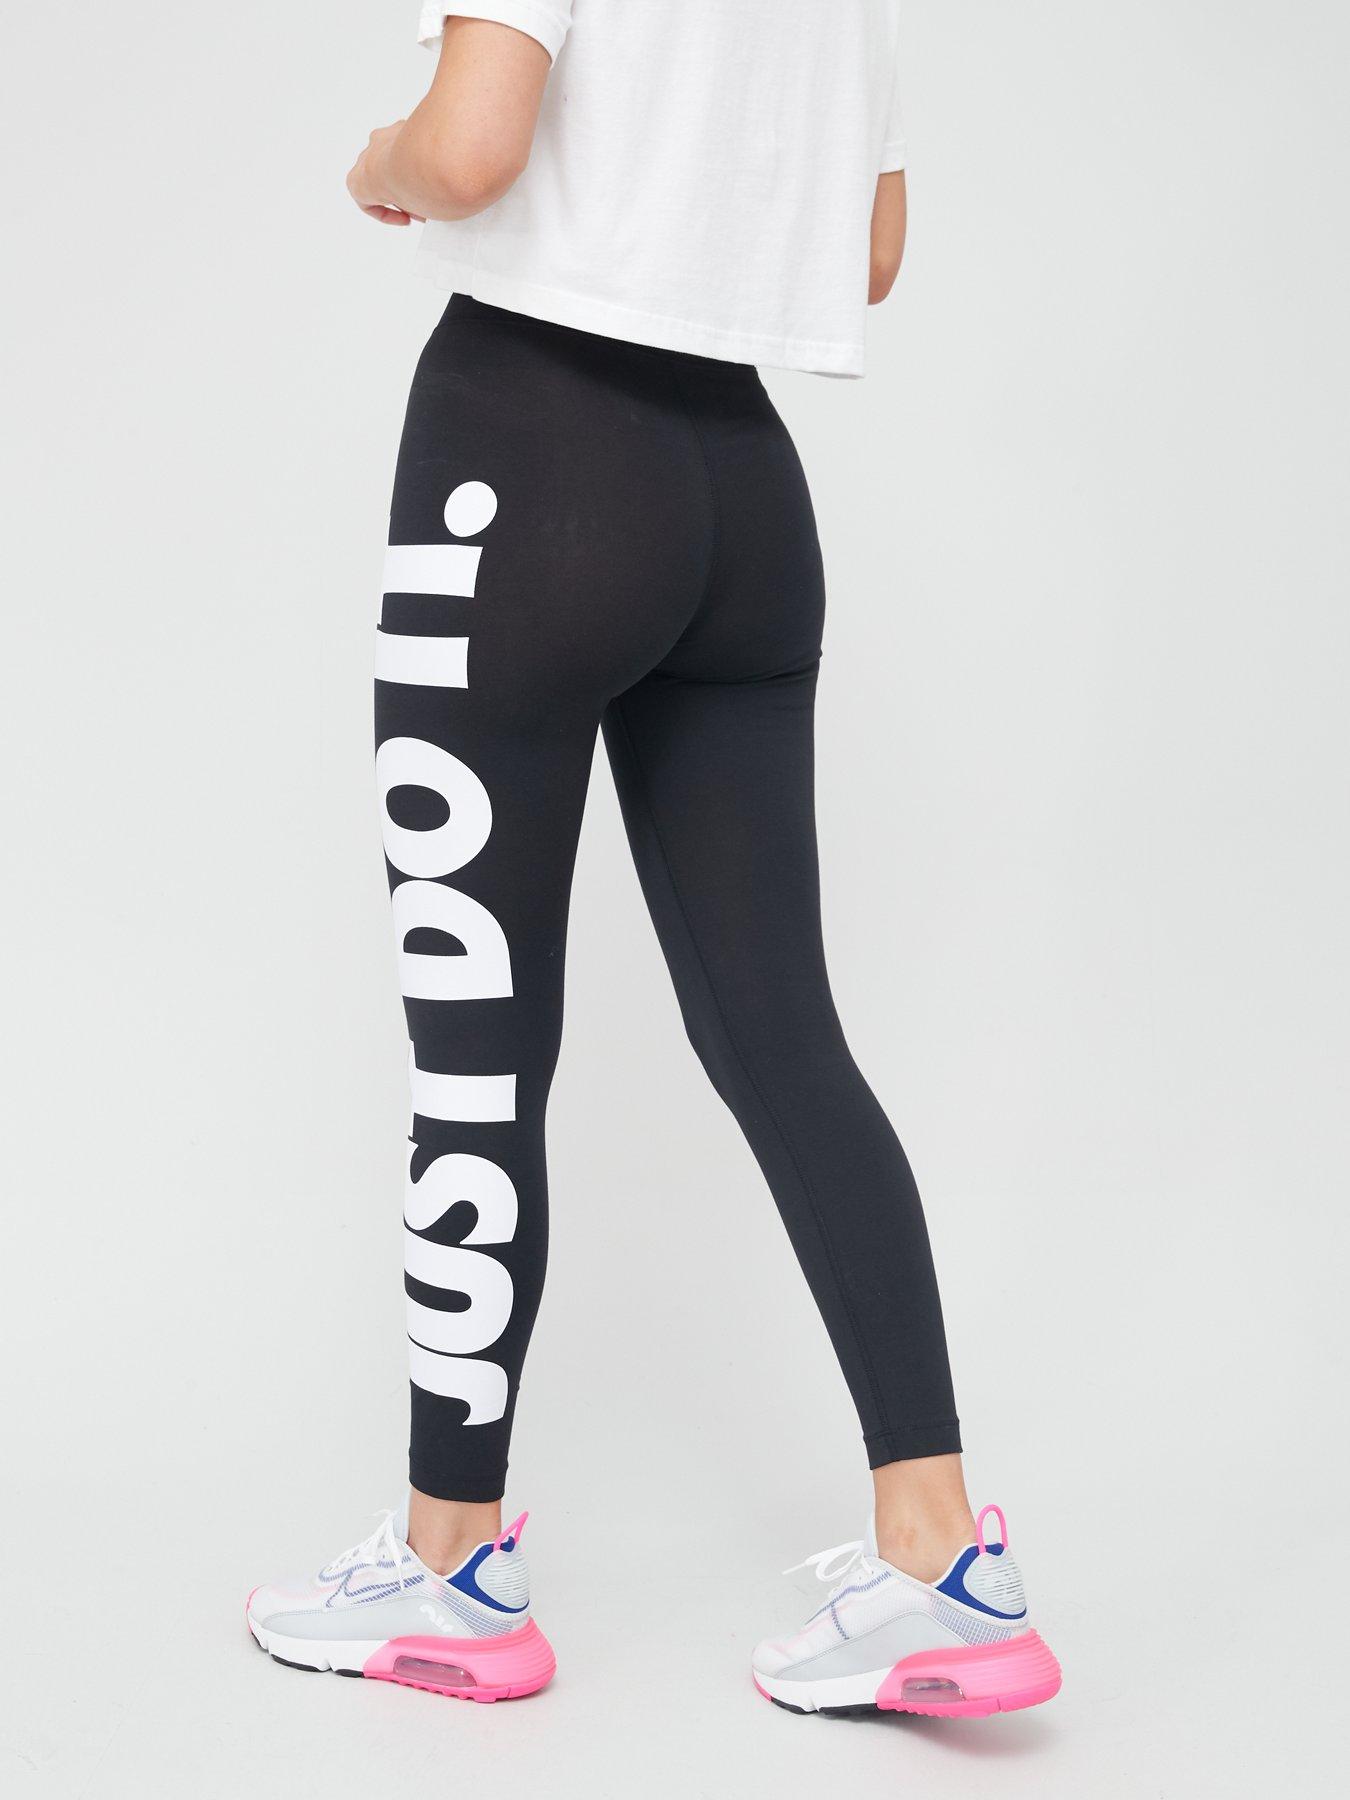 Nike Womens Small Tight Fit High Waist Leggings Black Just Do It